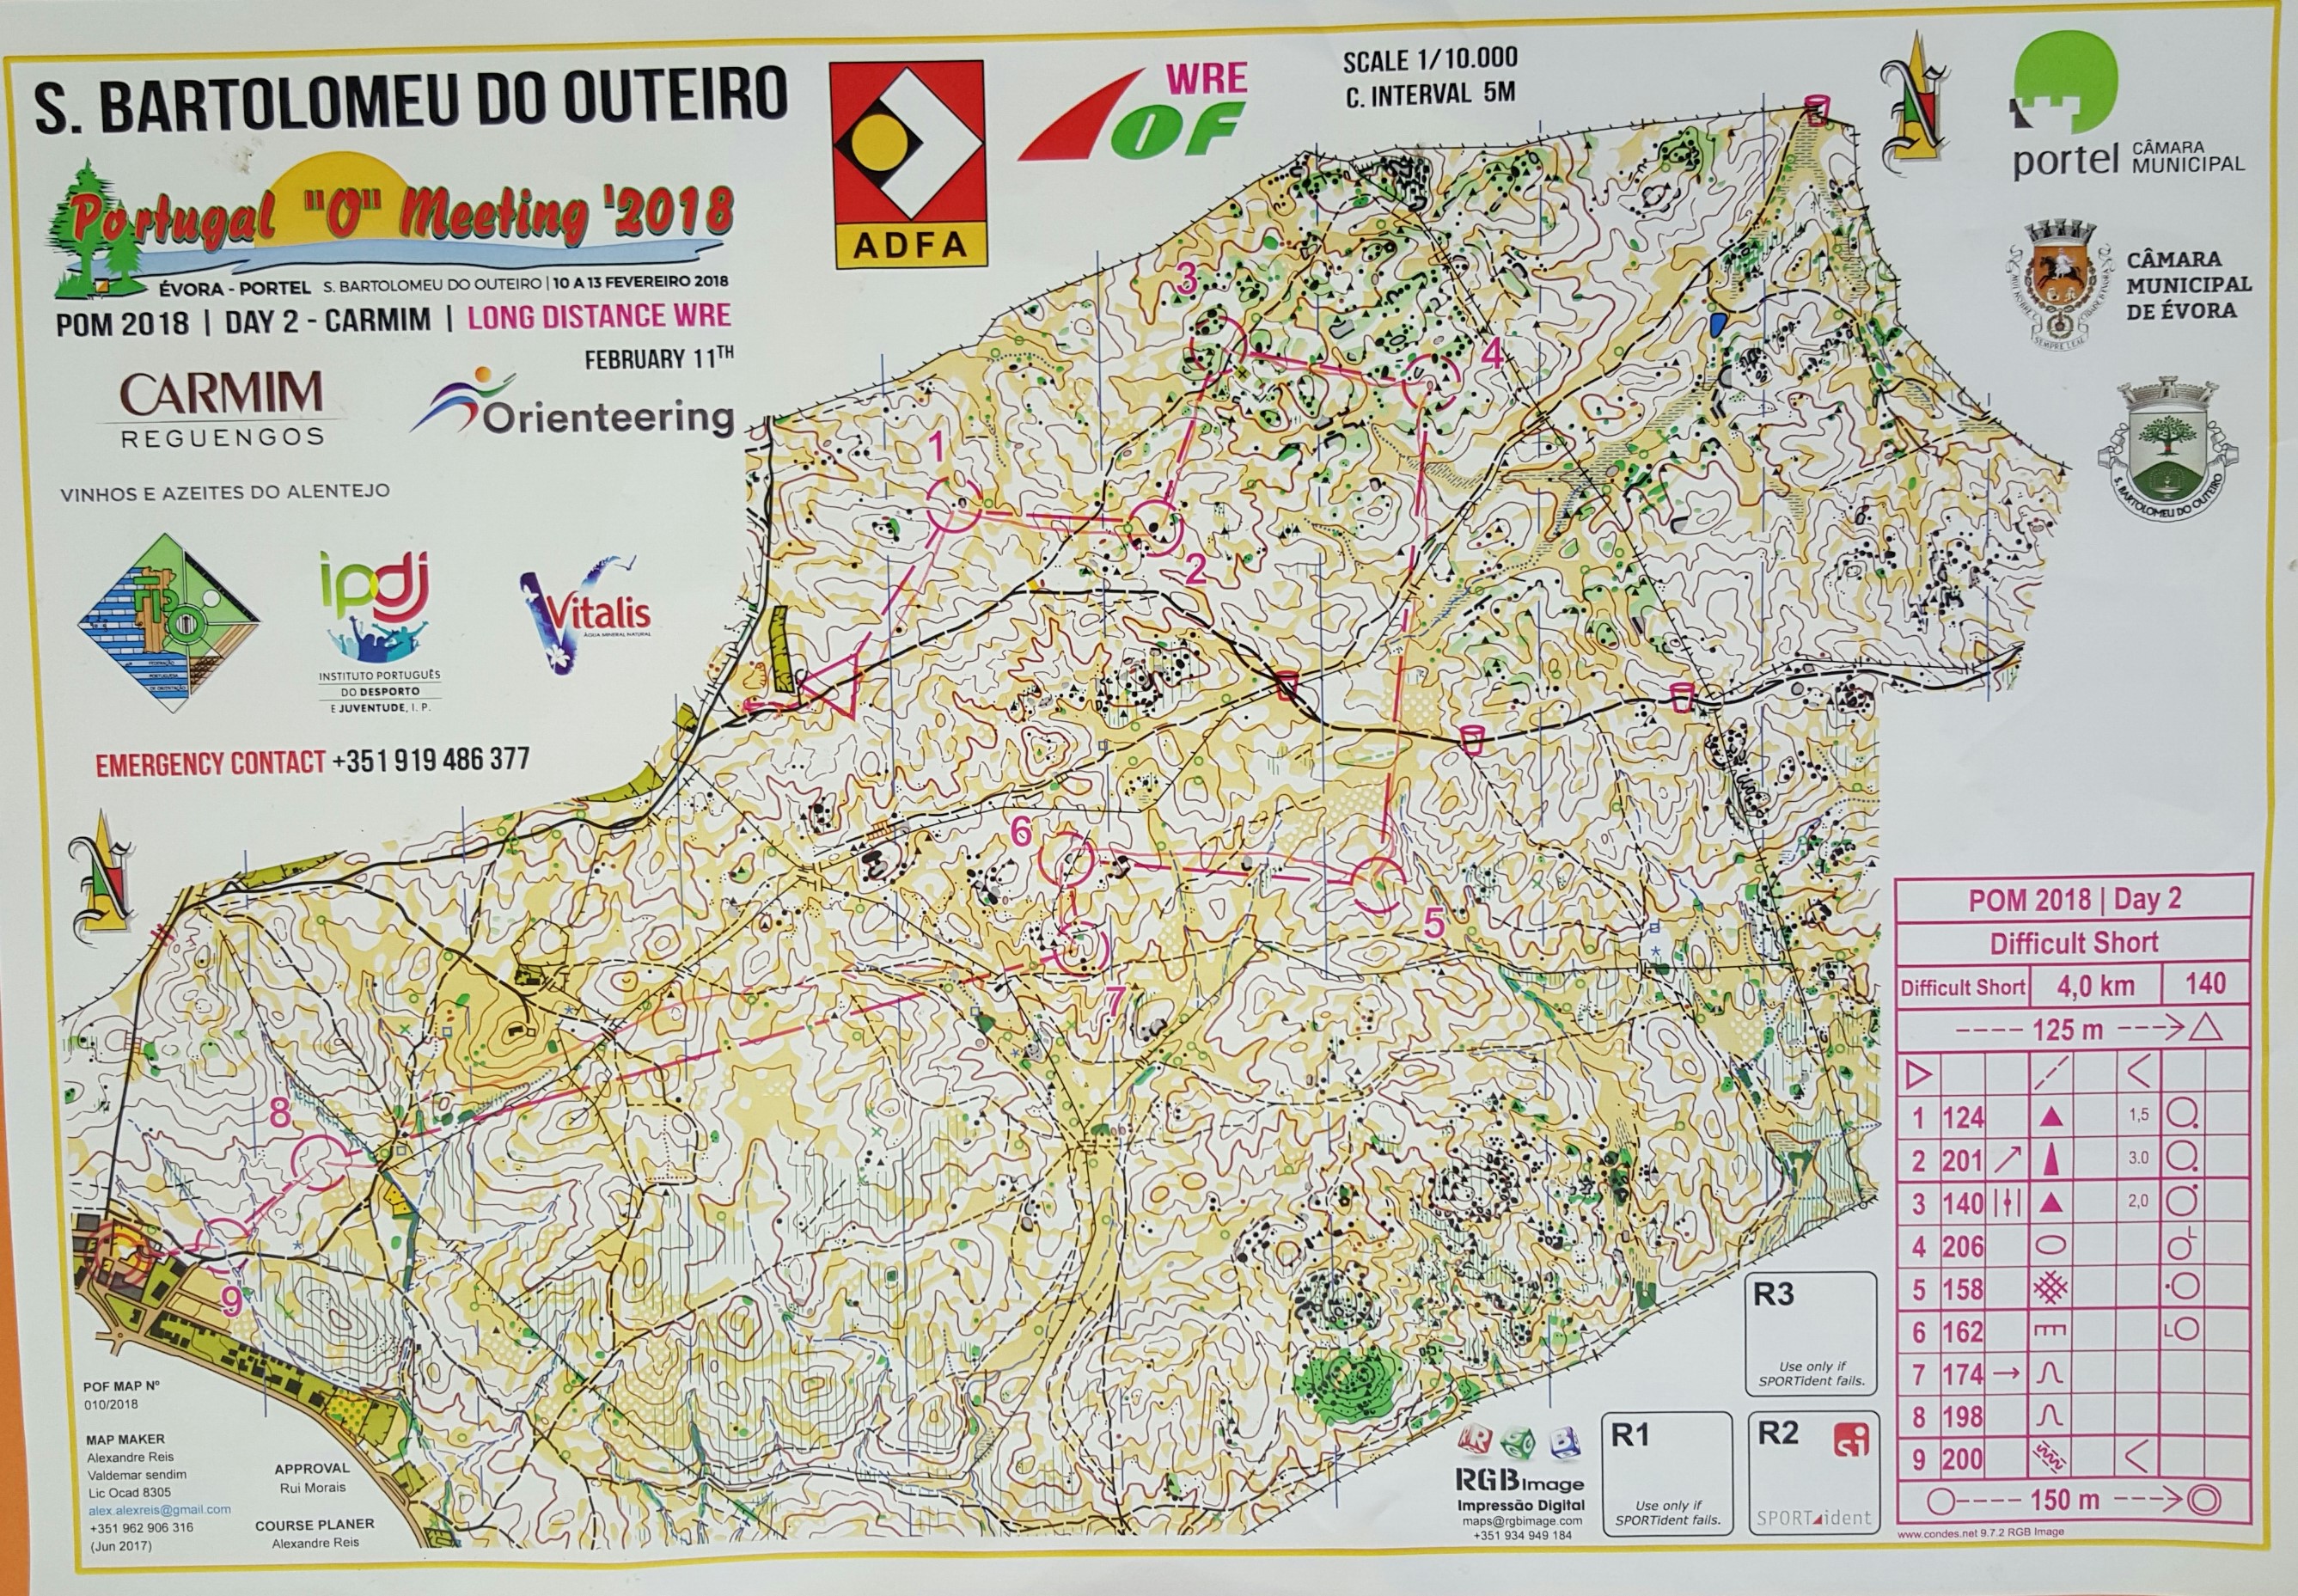 Portugal O-Meeting day 2 long, Difficult Short (11-02-2018)